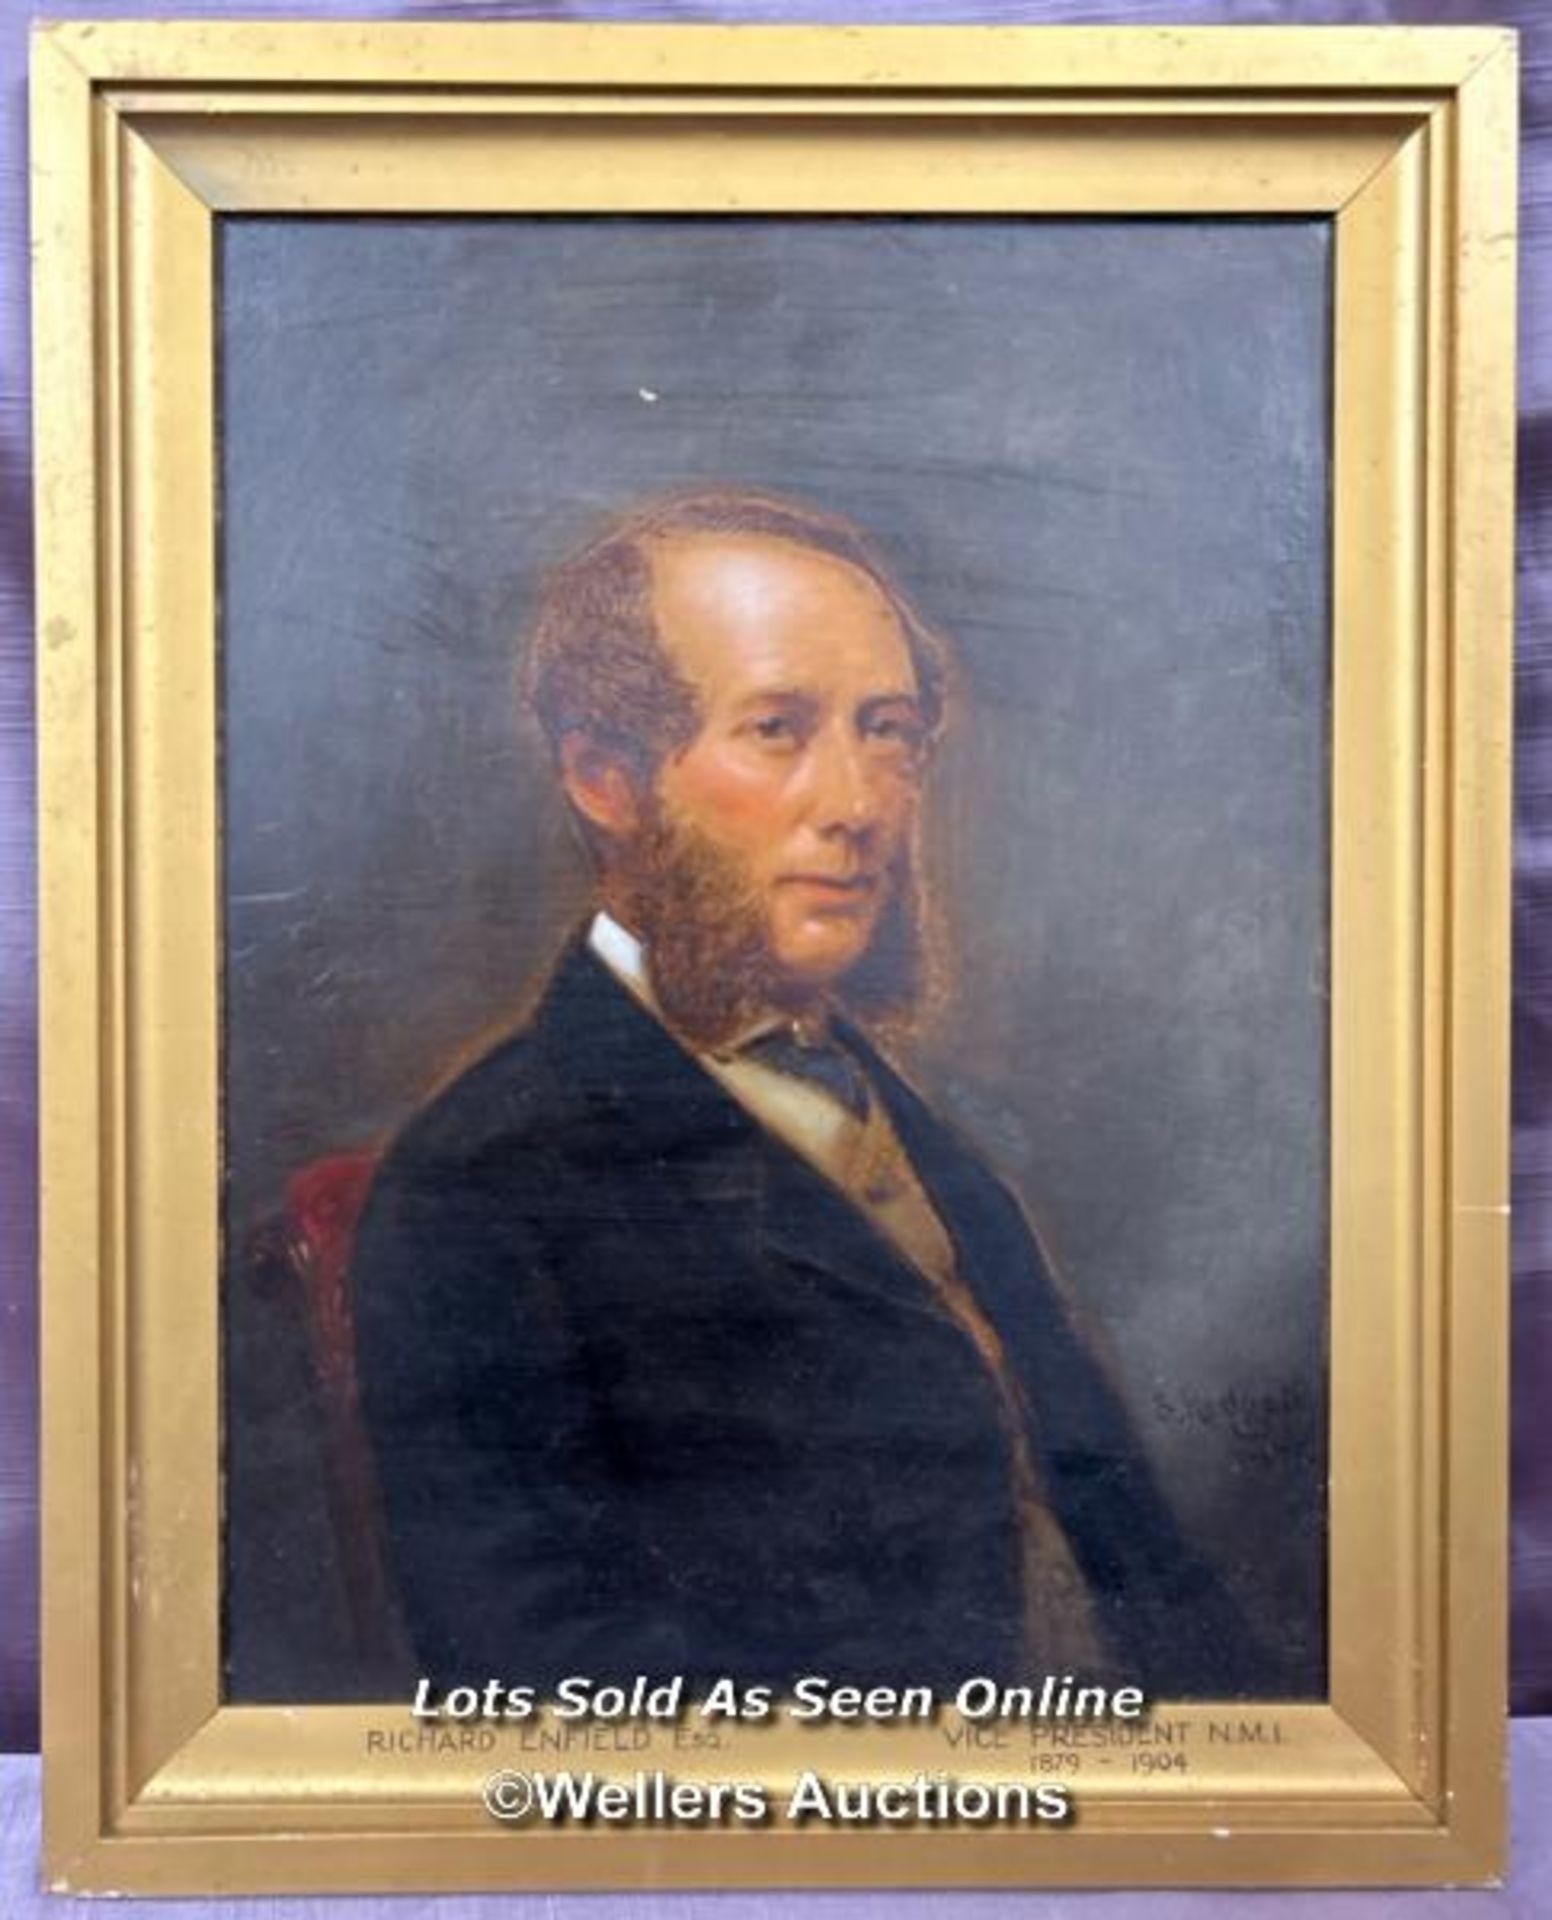 OIL ON BOARD BY S. REDGATE (1875) OF RICHARD ENFIELD ESQUIRE, VICE PRESIDENT, N.M.I. 1879-1904, 34 X